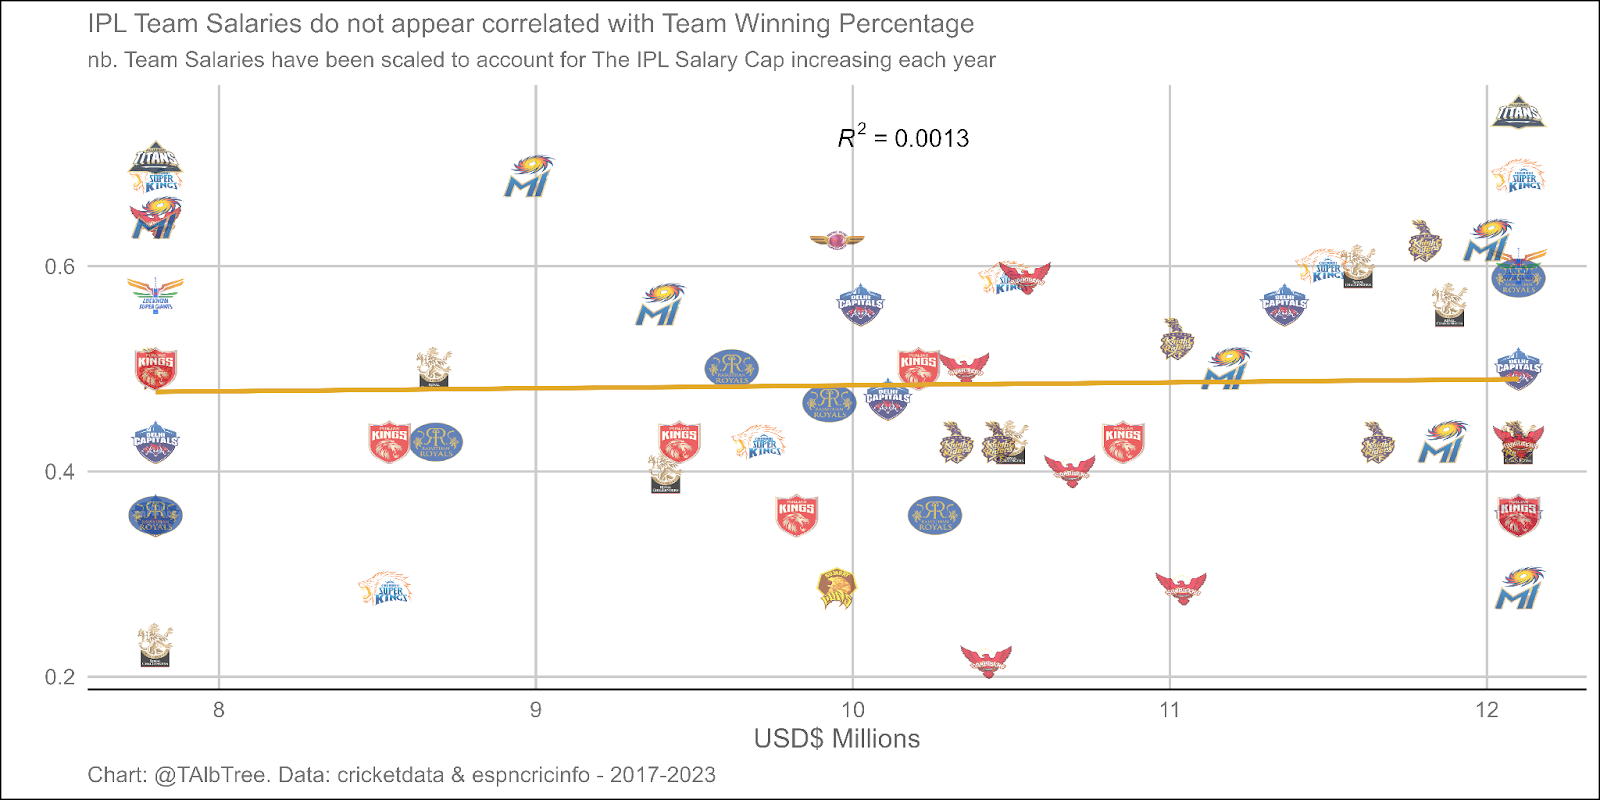 Scatter plot using team logos comparing scaled team salary amounts, and their winning percentage